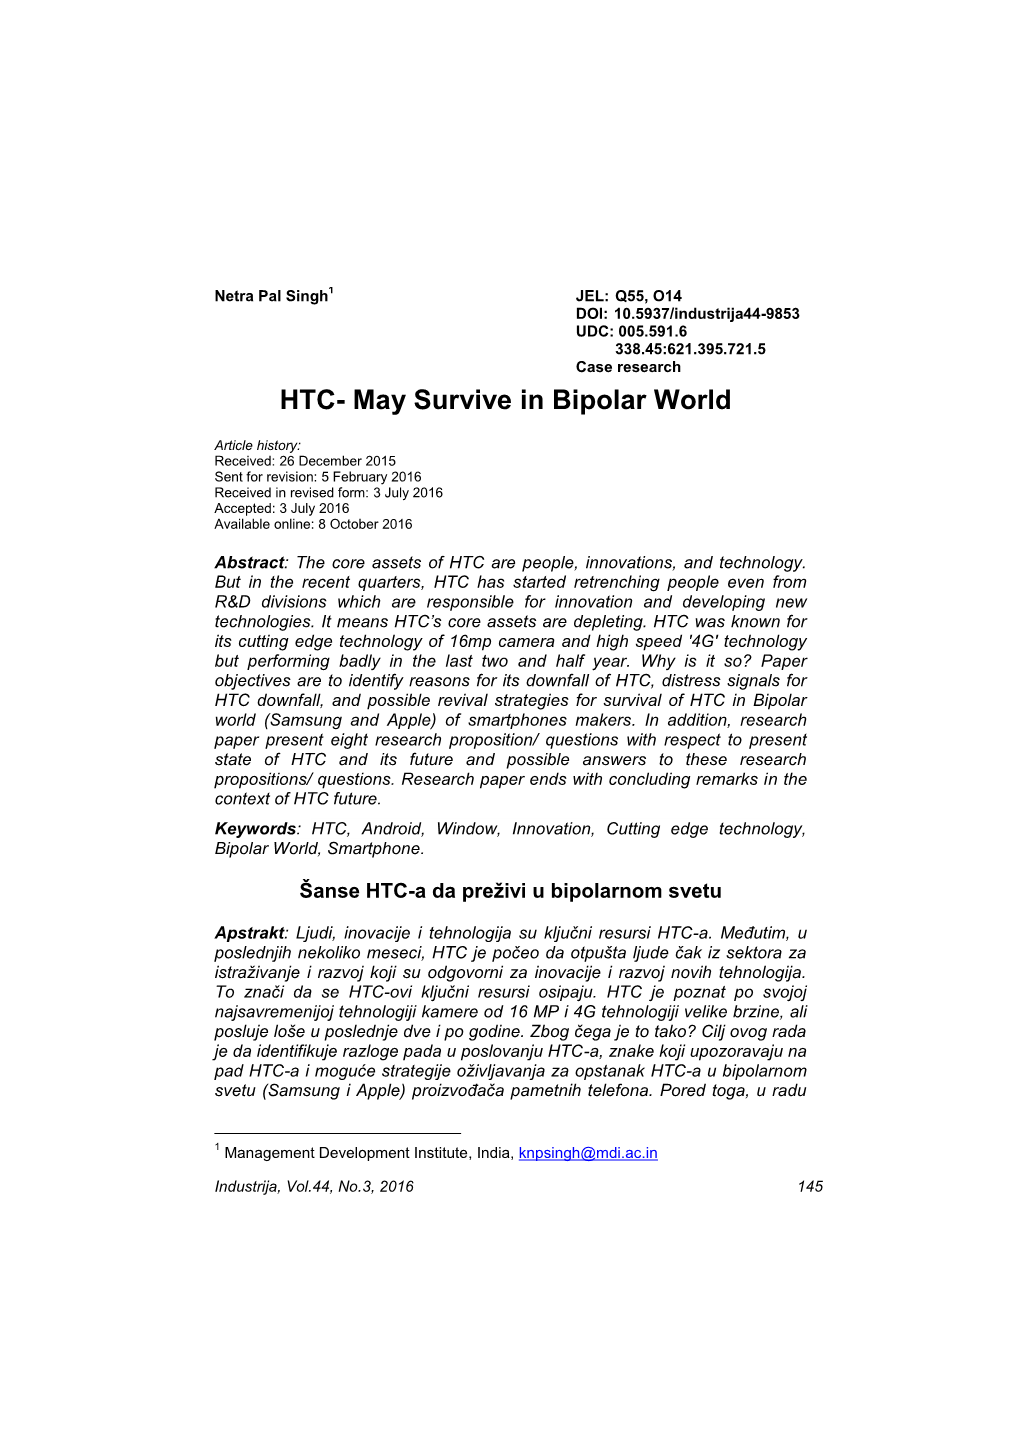 HTC- May Survive in Bipolar World